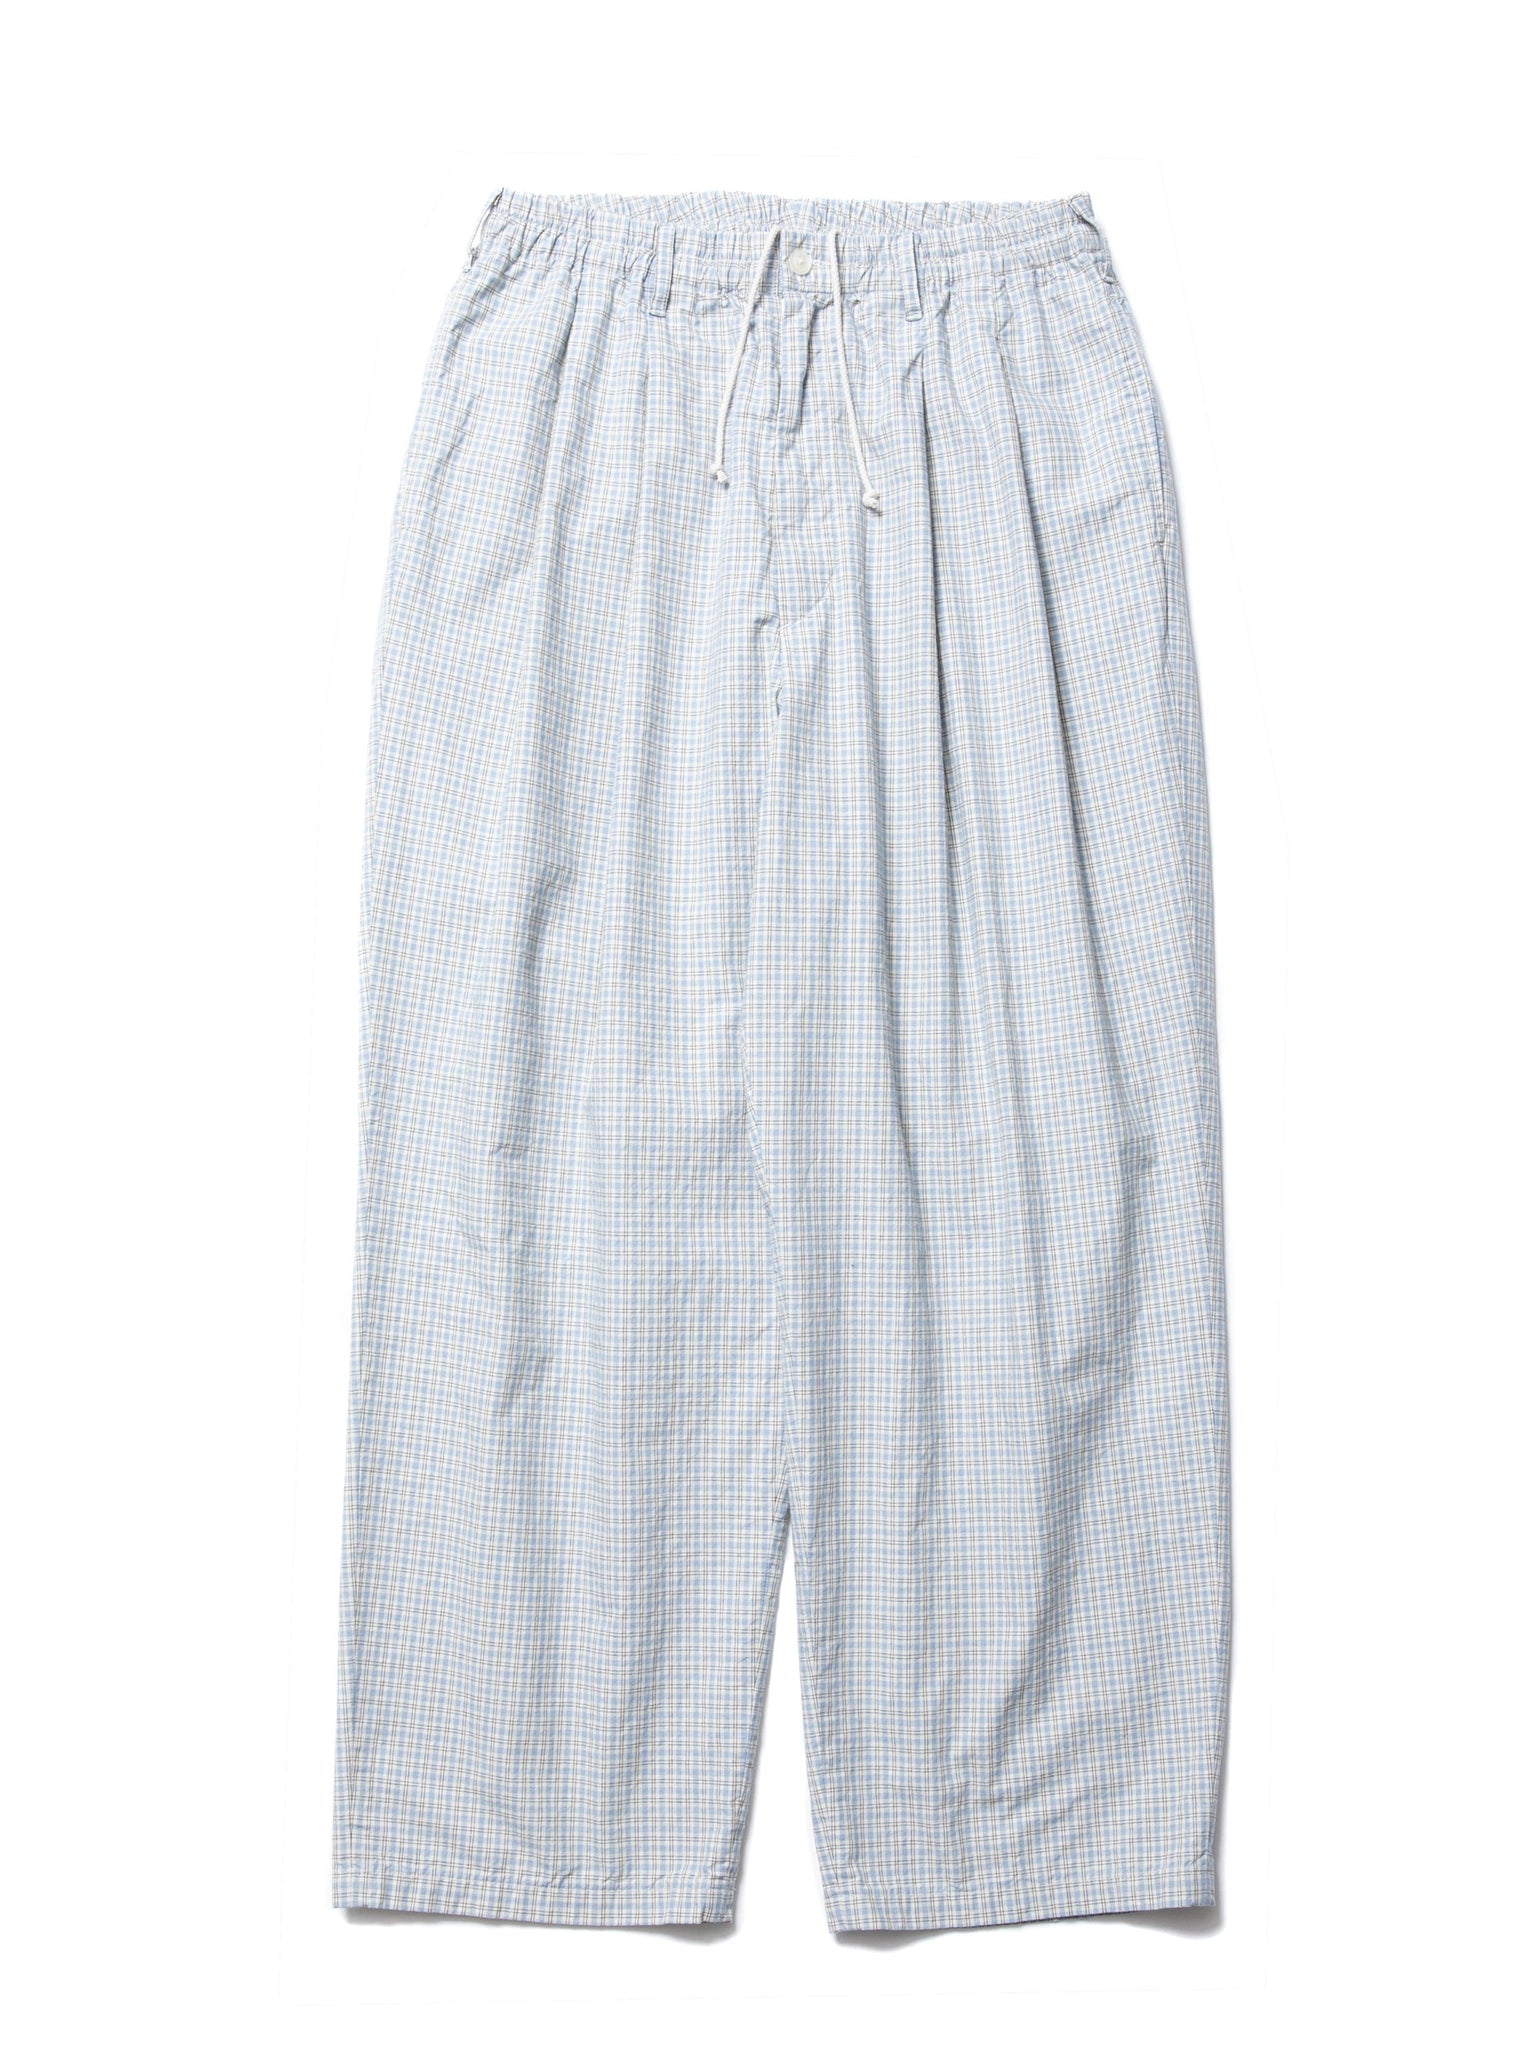 Check Weather Cloth 2 Tuck Easy Pants